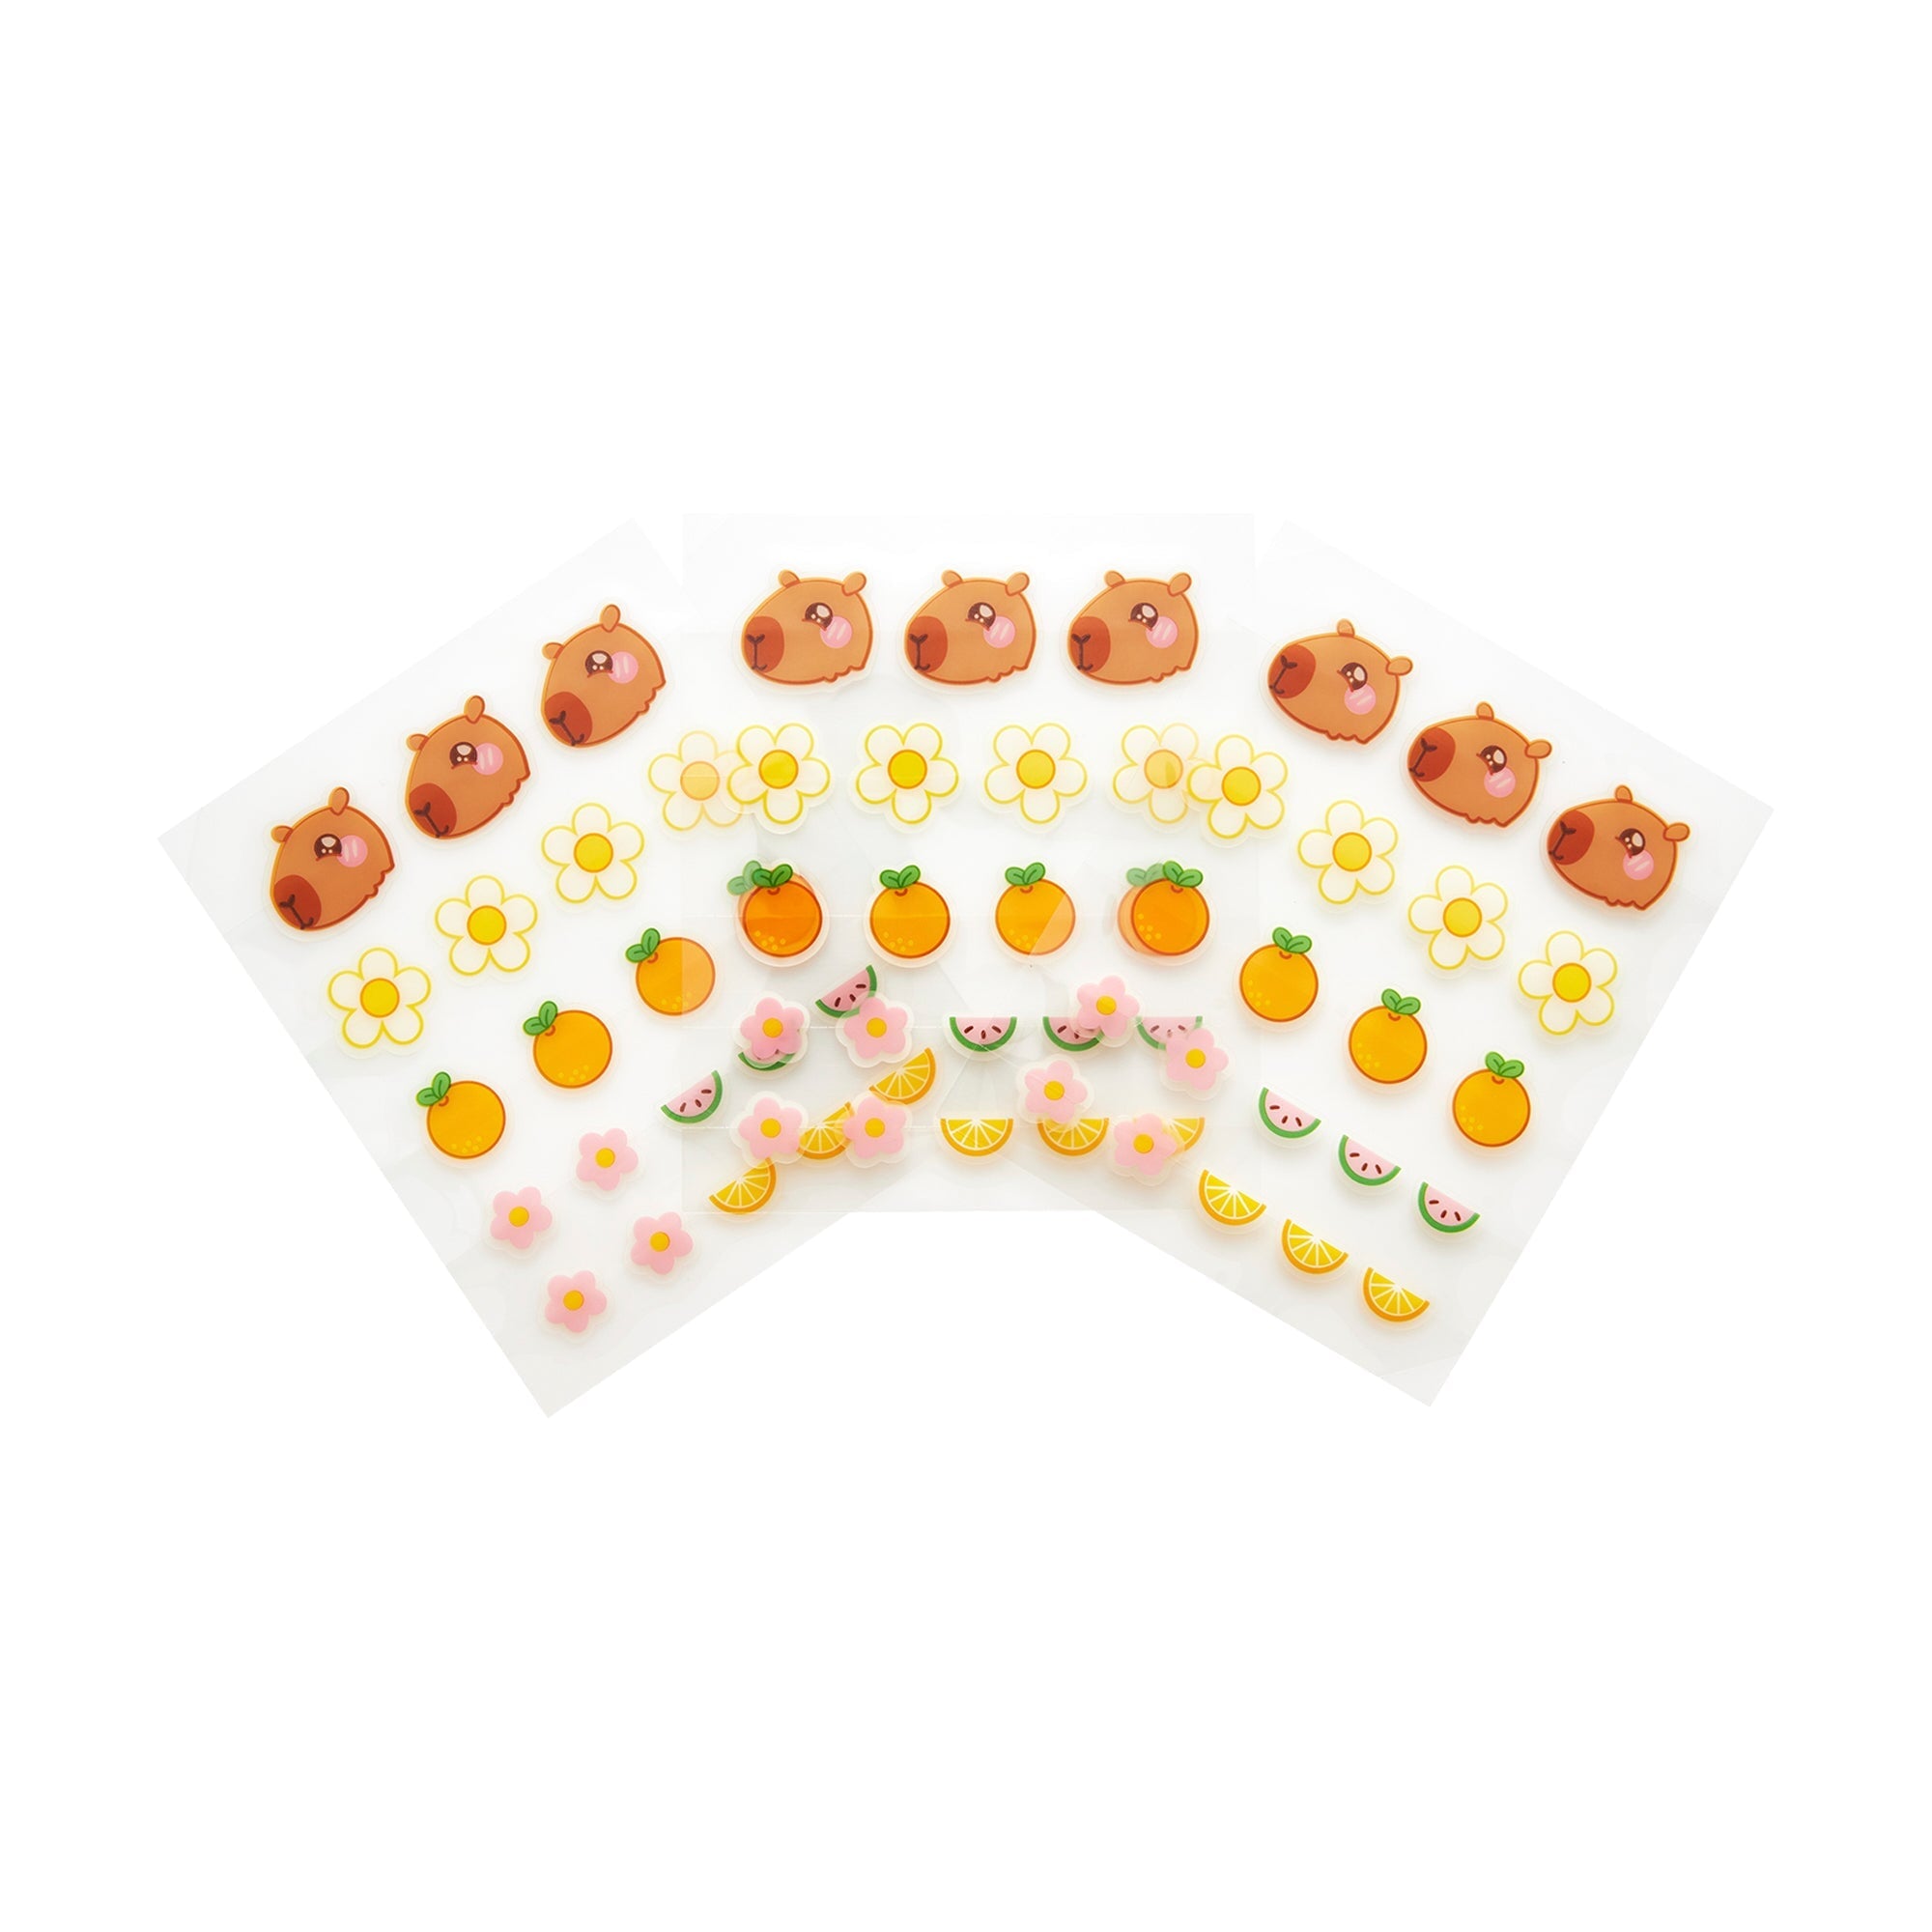 Cheery Bright Skin - Capybara Klean Beauty™ Blemish Patches Sheet Mask The Crème Shop 